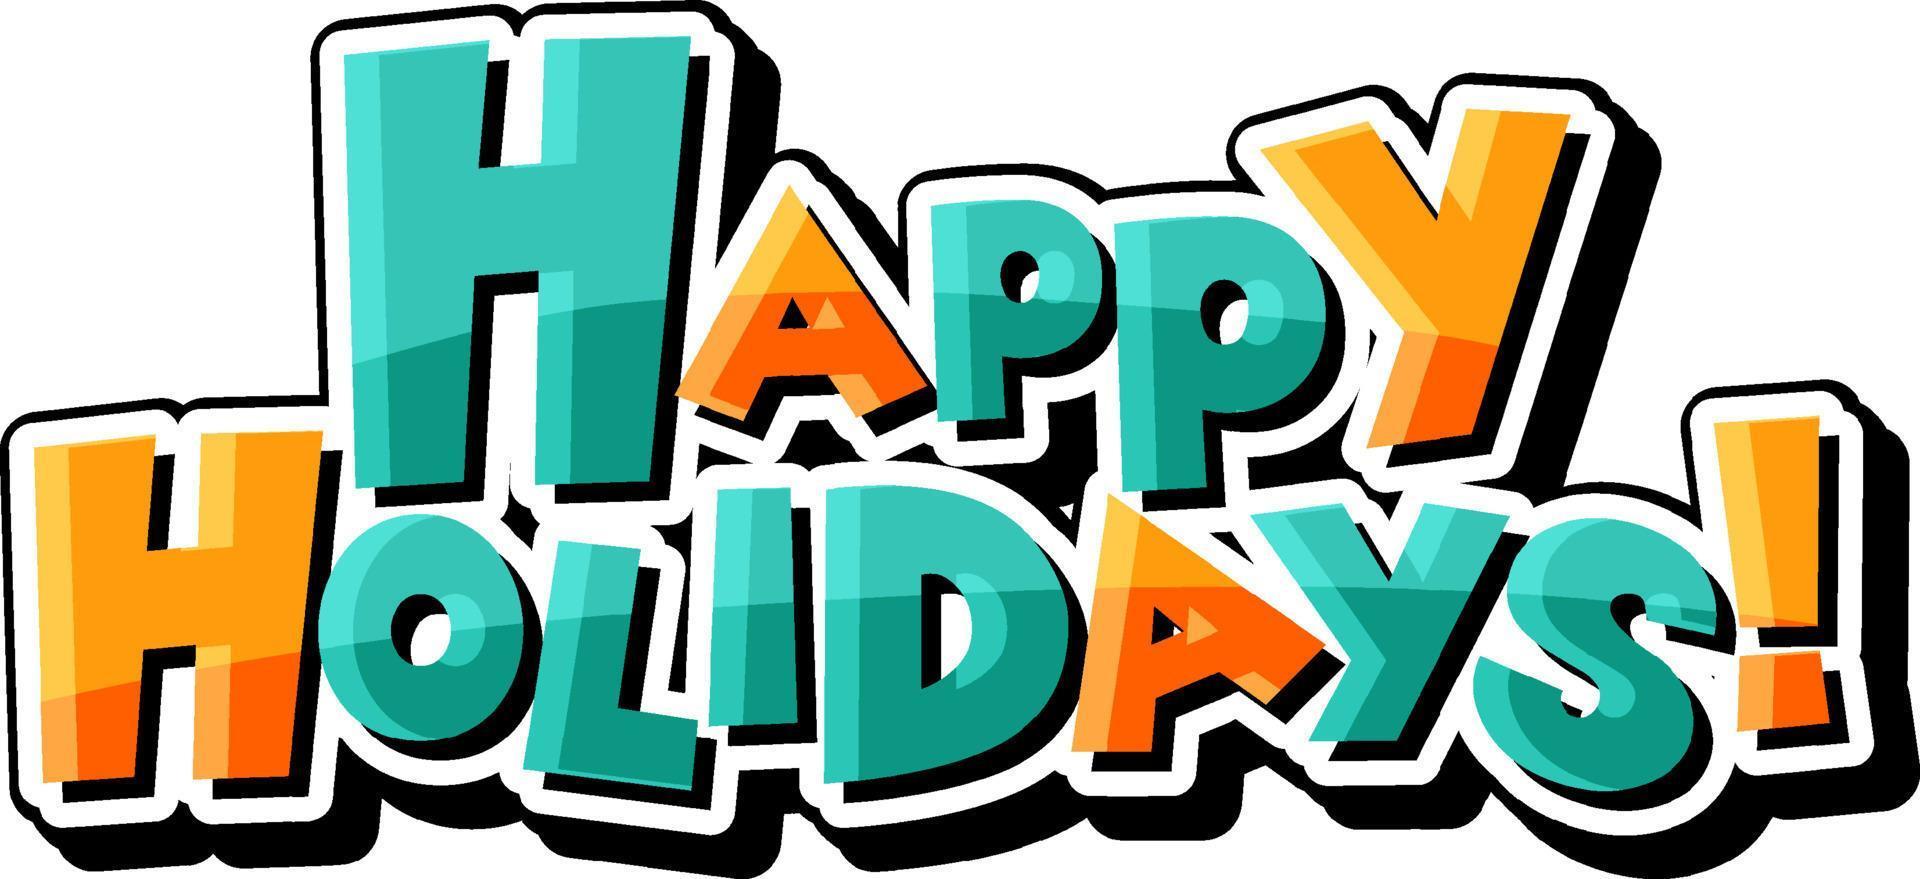 Happy holiday text icon on white background vector